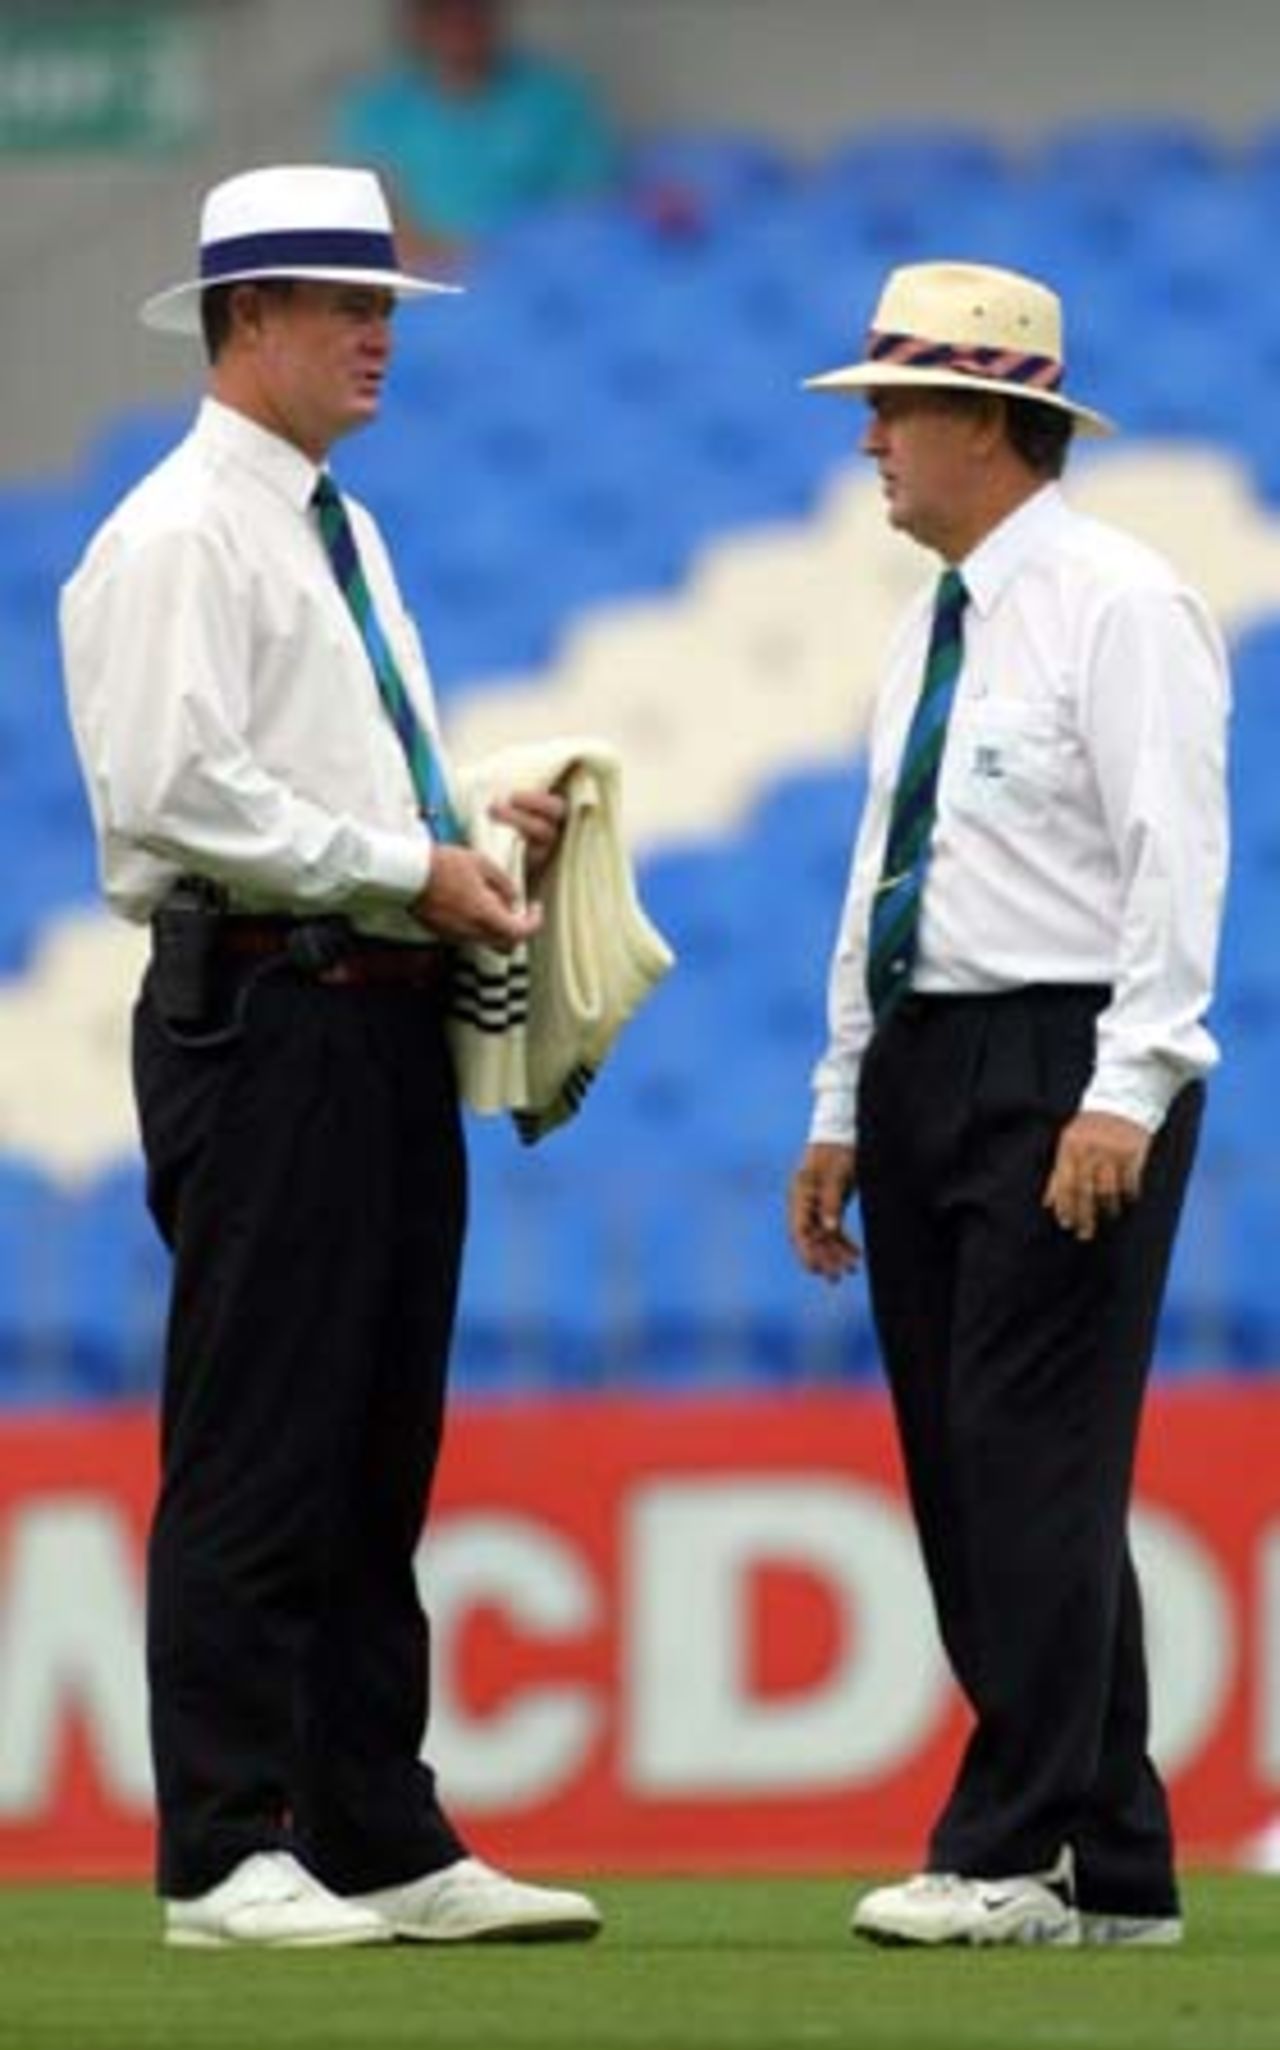 Umpires Russell Tiffin and Doug Cowie discuss the situation as rain falls on the second morning. 1st Test: New Zealand v Pakistan at Eden Park, Auckland, 8-12 March 2001 (9 March 2001).